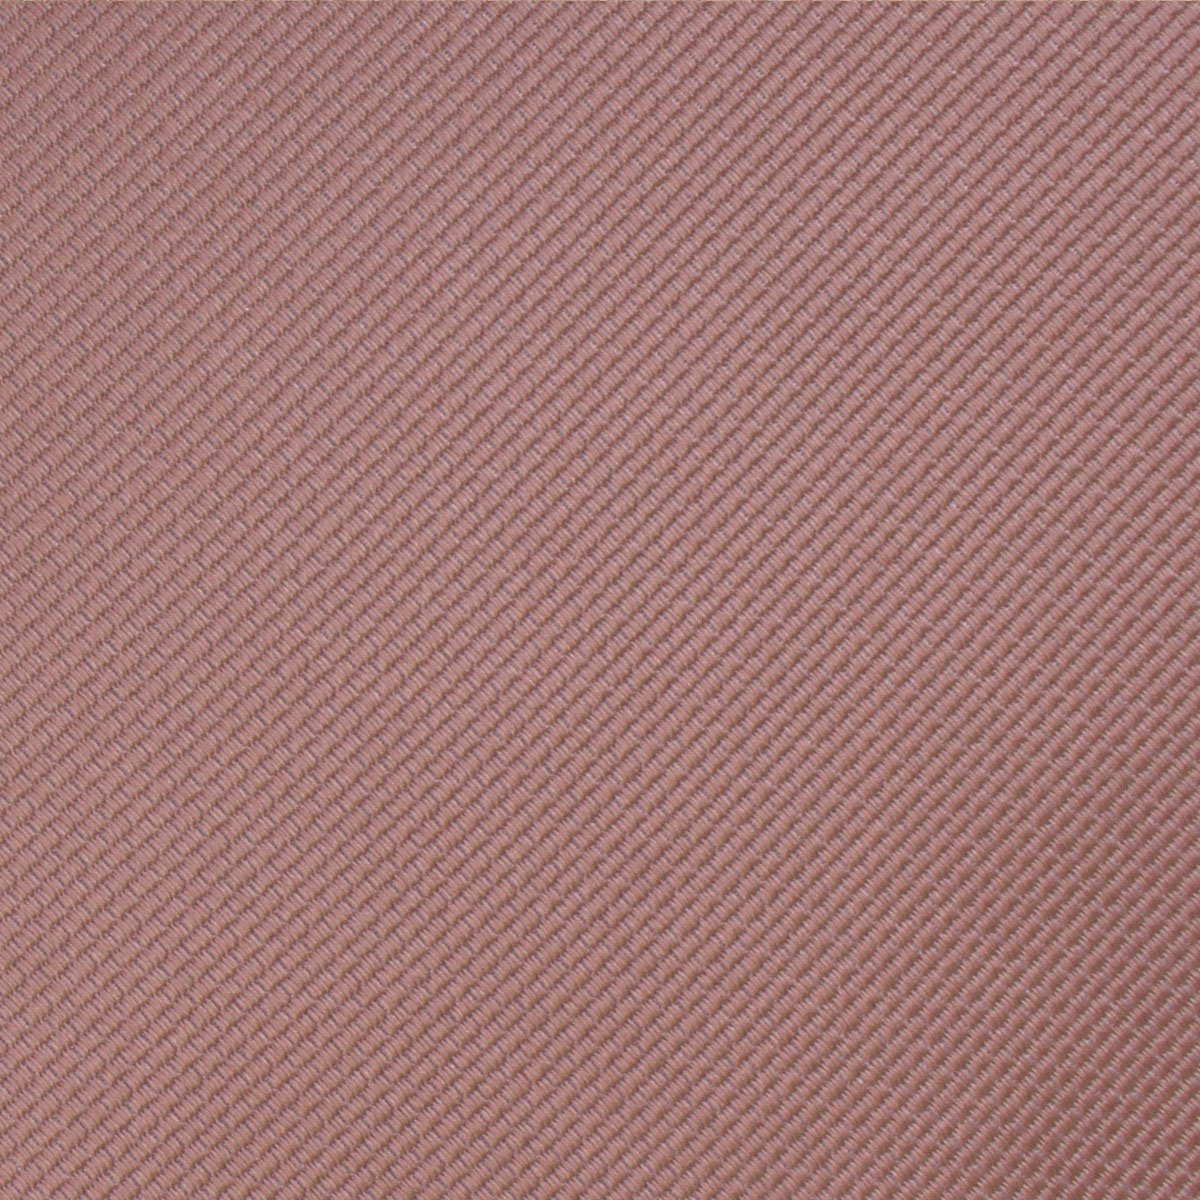 Antique Dusty Rose Weave Skinny Tie Fabric